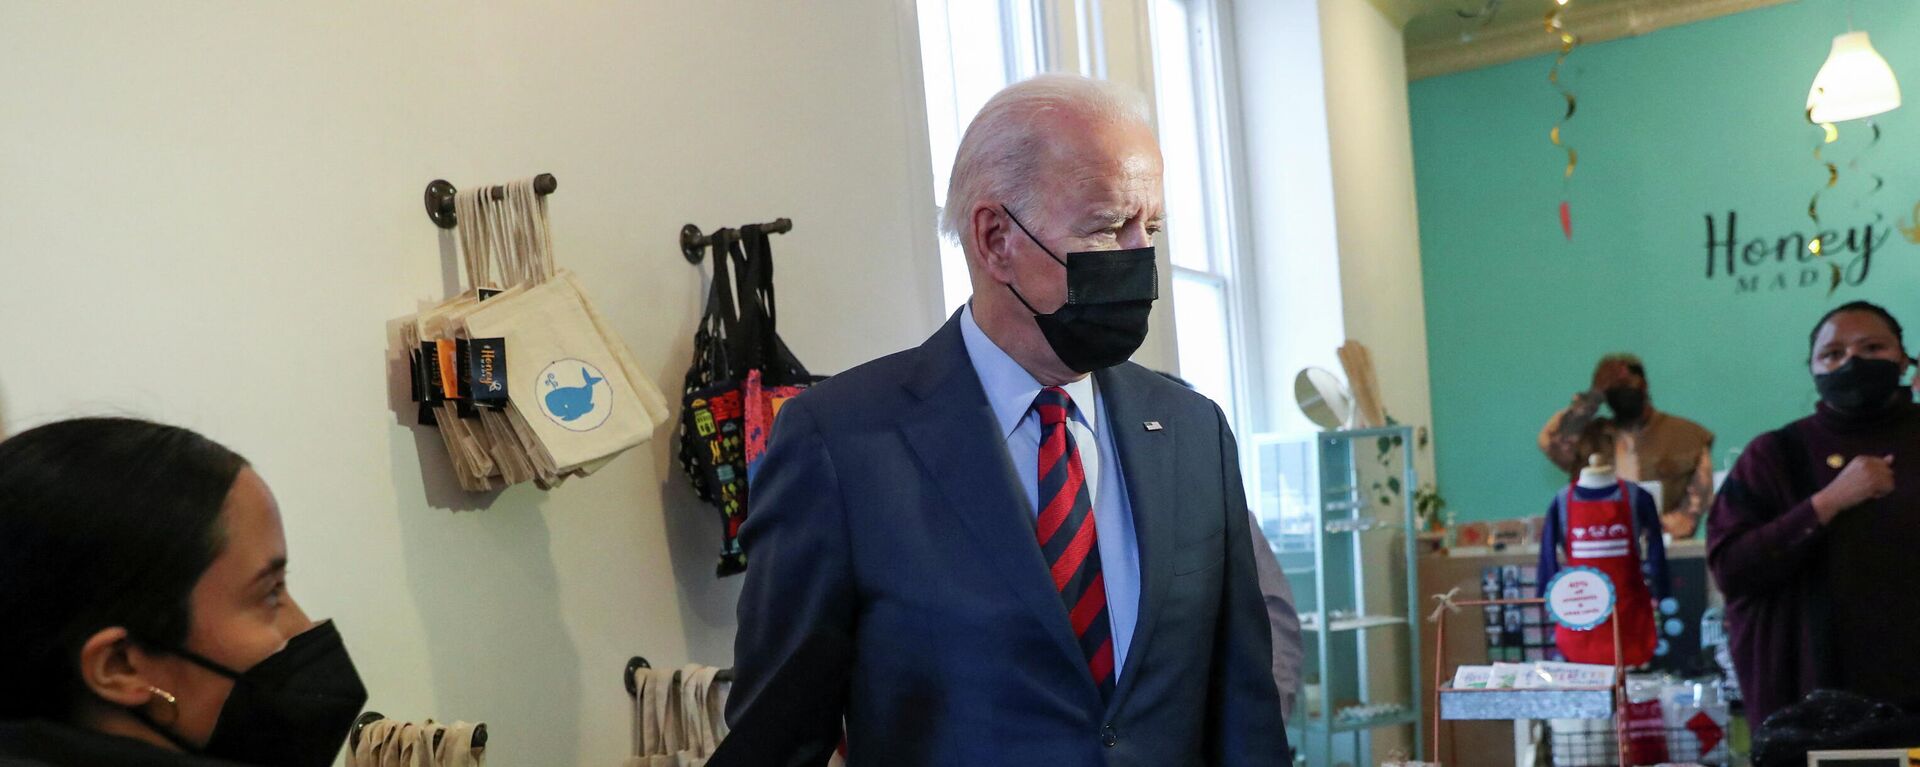 U.S. President Joe Biden listens to a question from a reporter about Russia and the Ukraine crisis as he pays a visit to a small clothing and gifts store on Capitol Hill in Washington, U.S., January 25, 2022. - Sputnik International, 1920, 25.01.2022